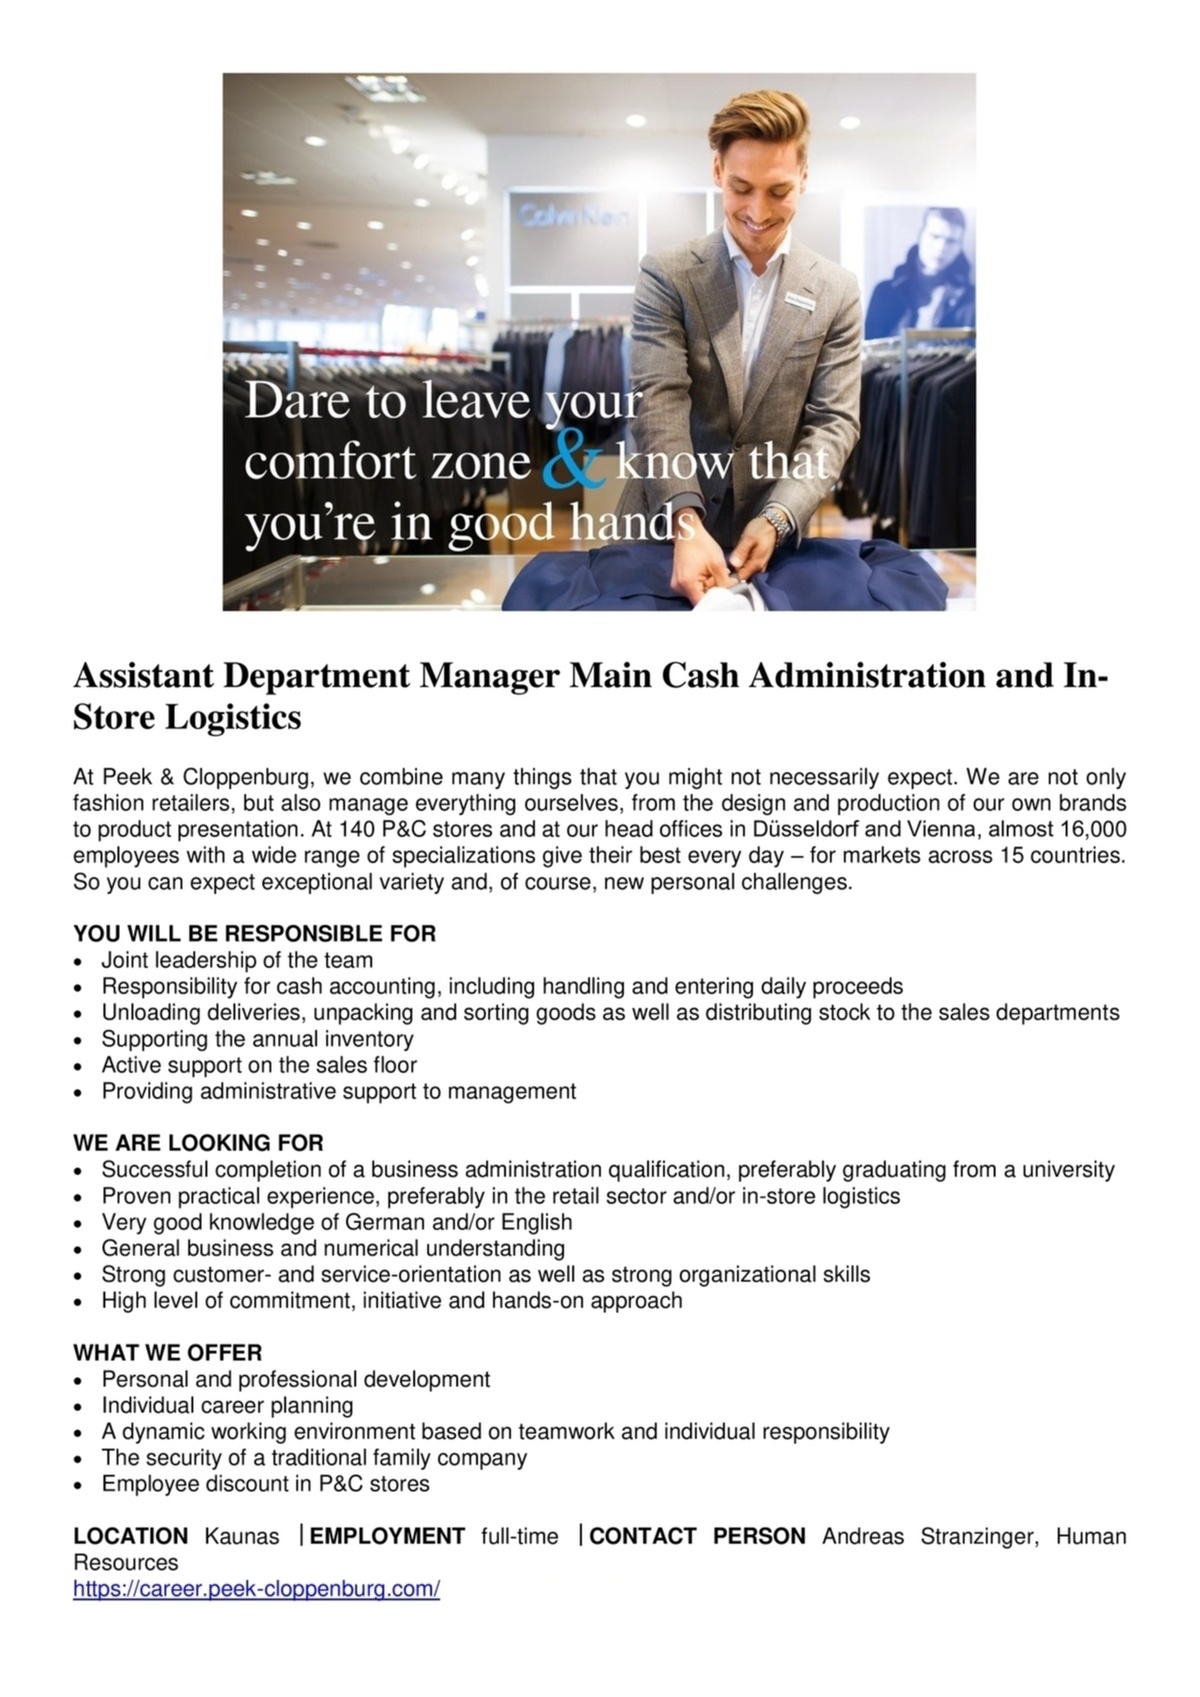 Peek & Cloppenburg Assistant Department Manager Main Cash Administration and In-Store Logistics